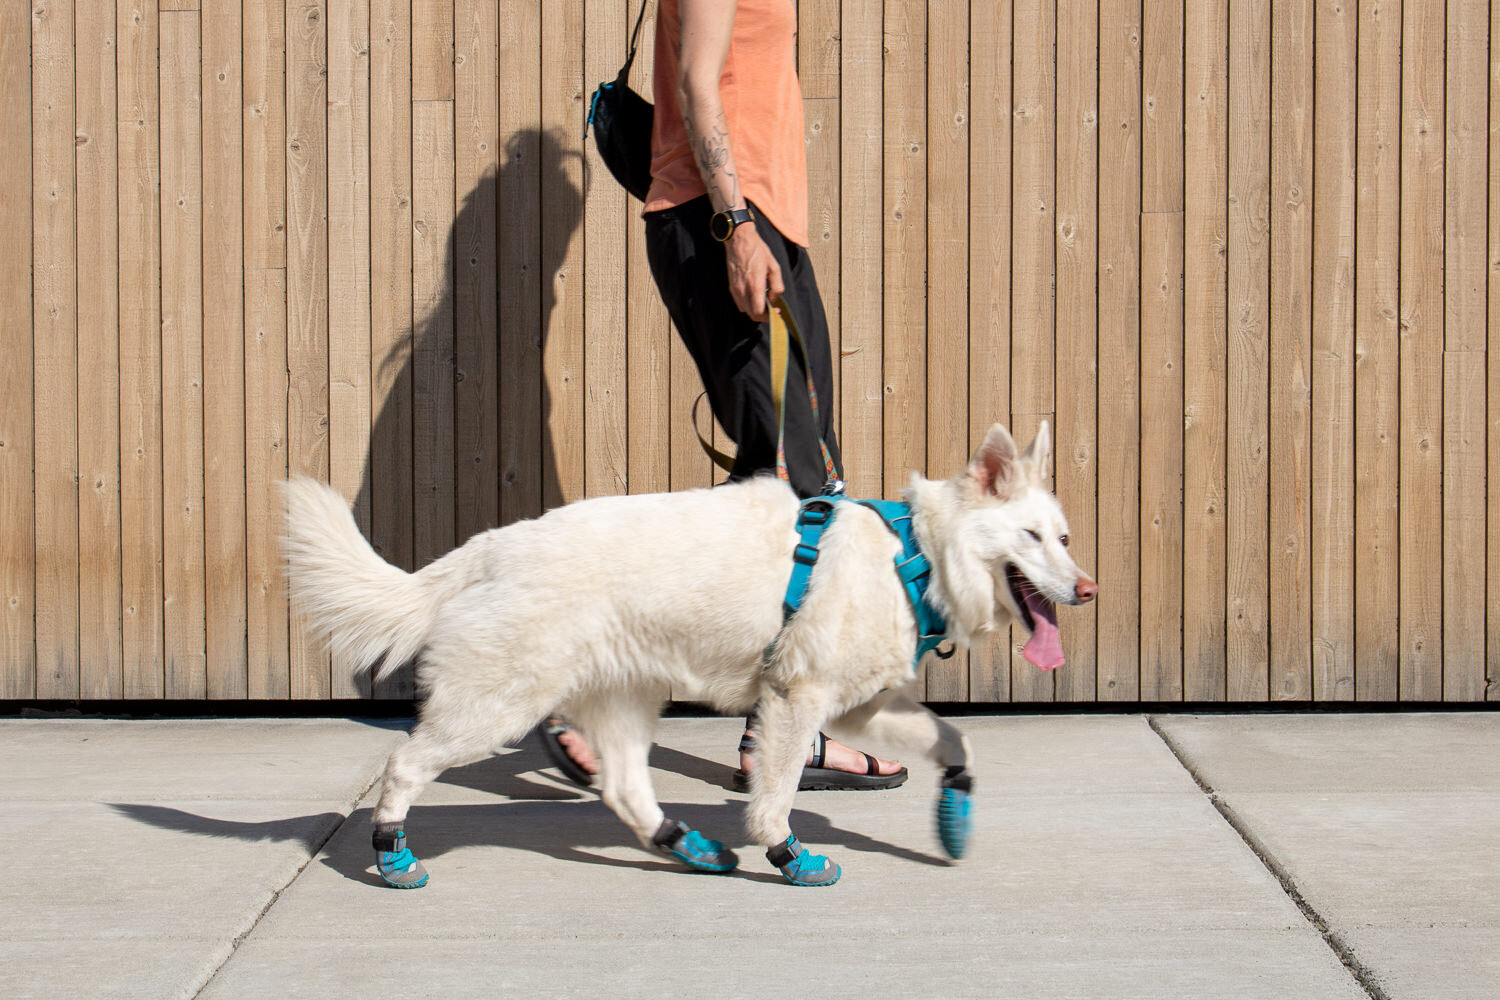 Dog boots, like the Ruffwear Grip Trex, are a great way to protect your dog’s paws from hot pavement